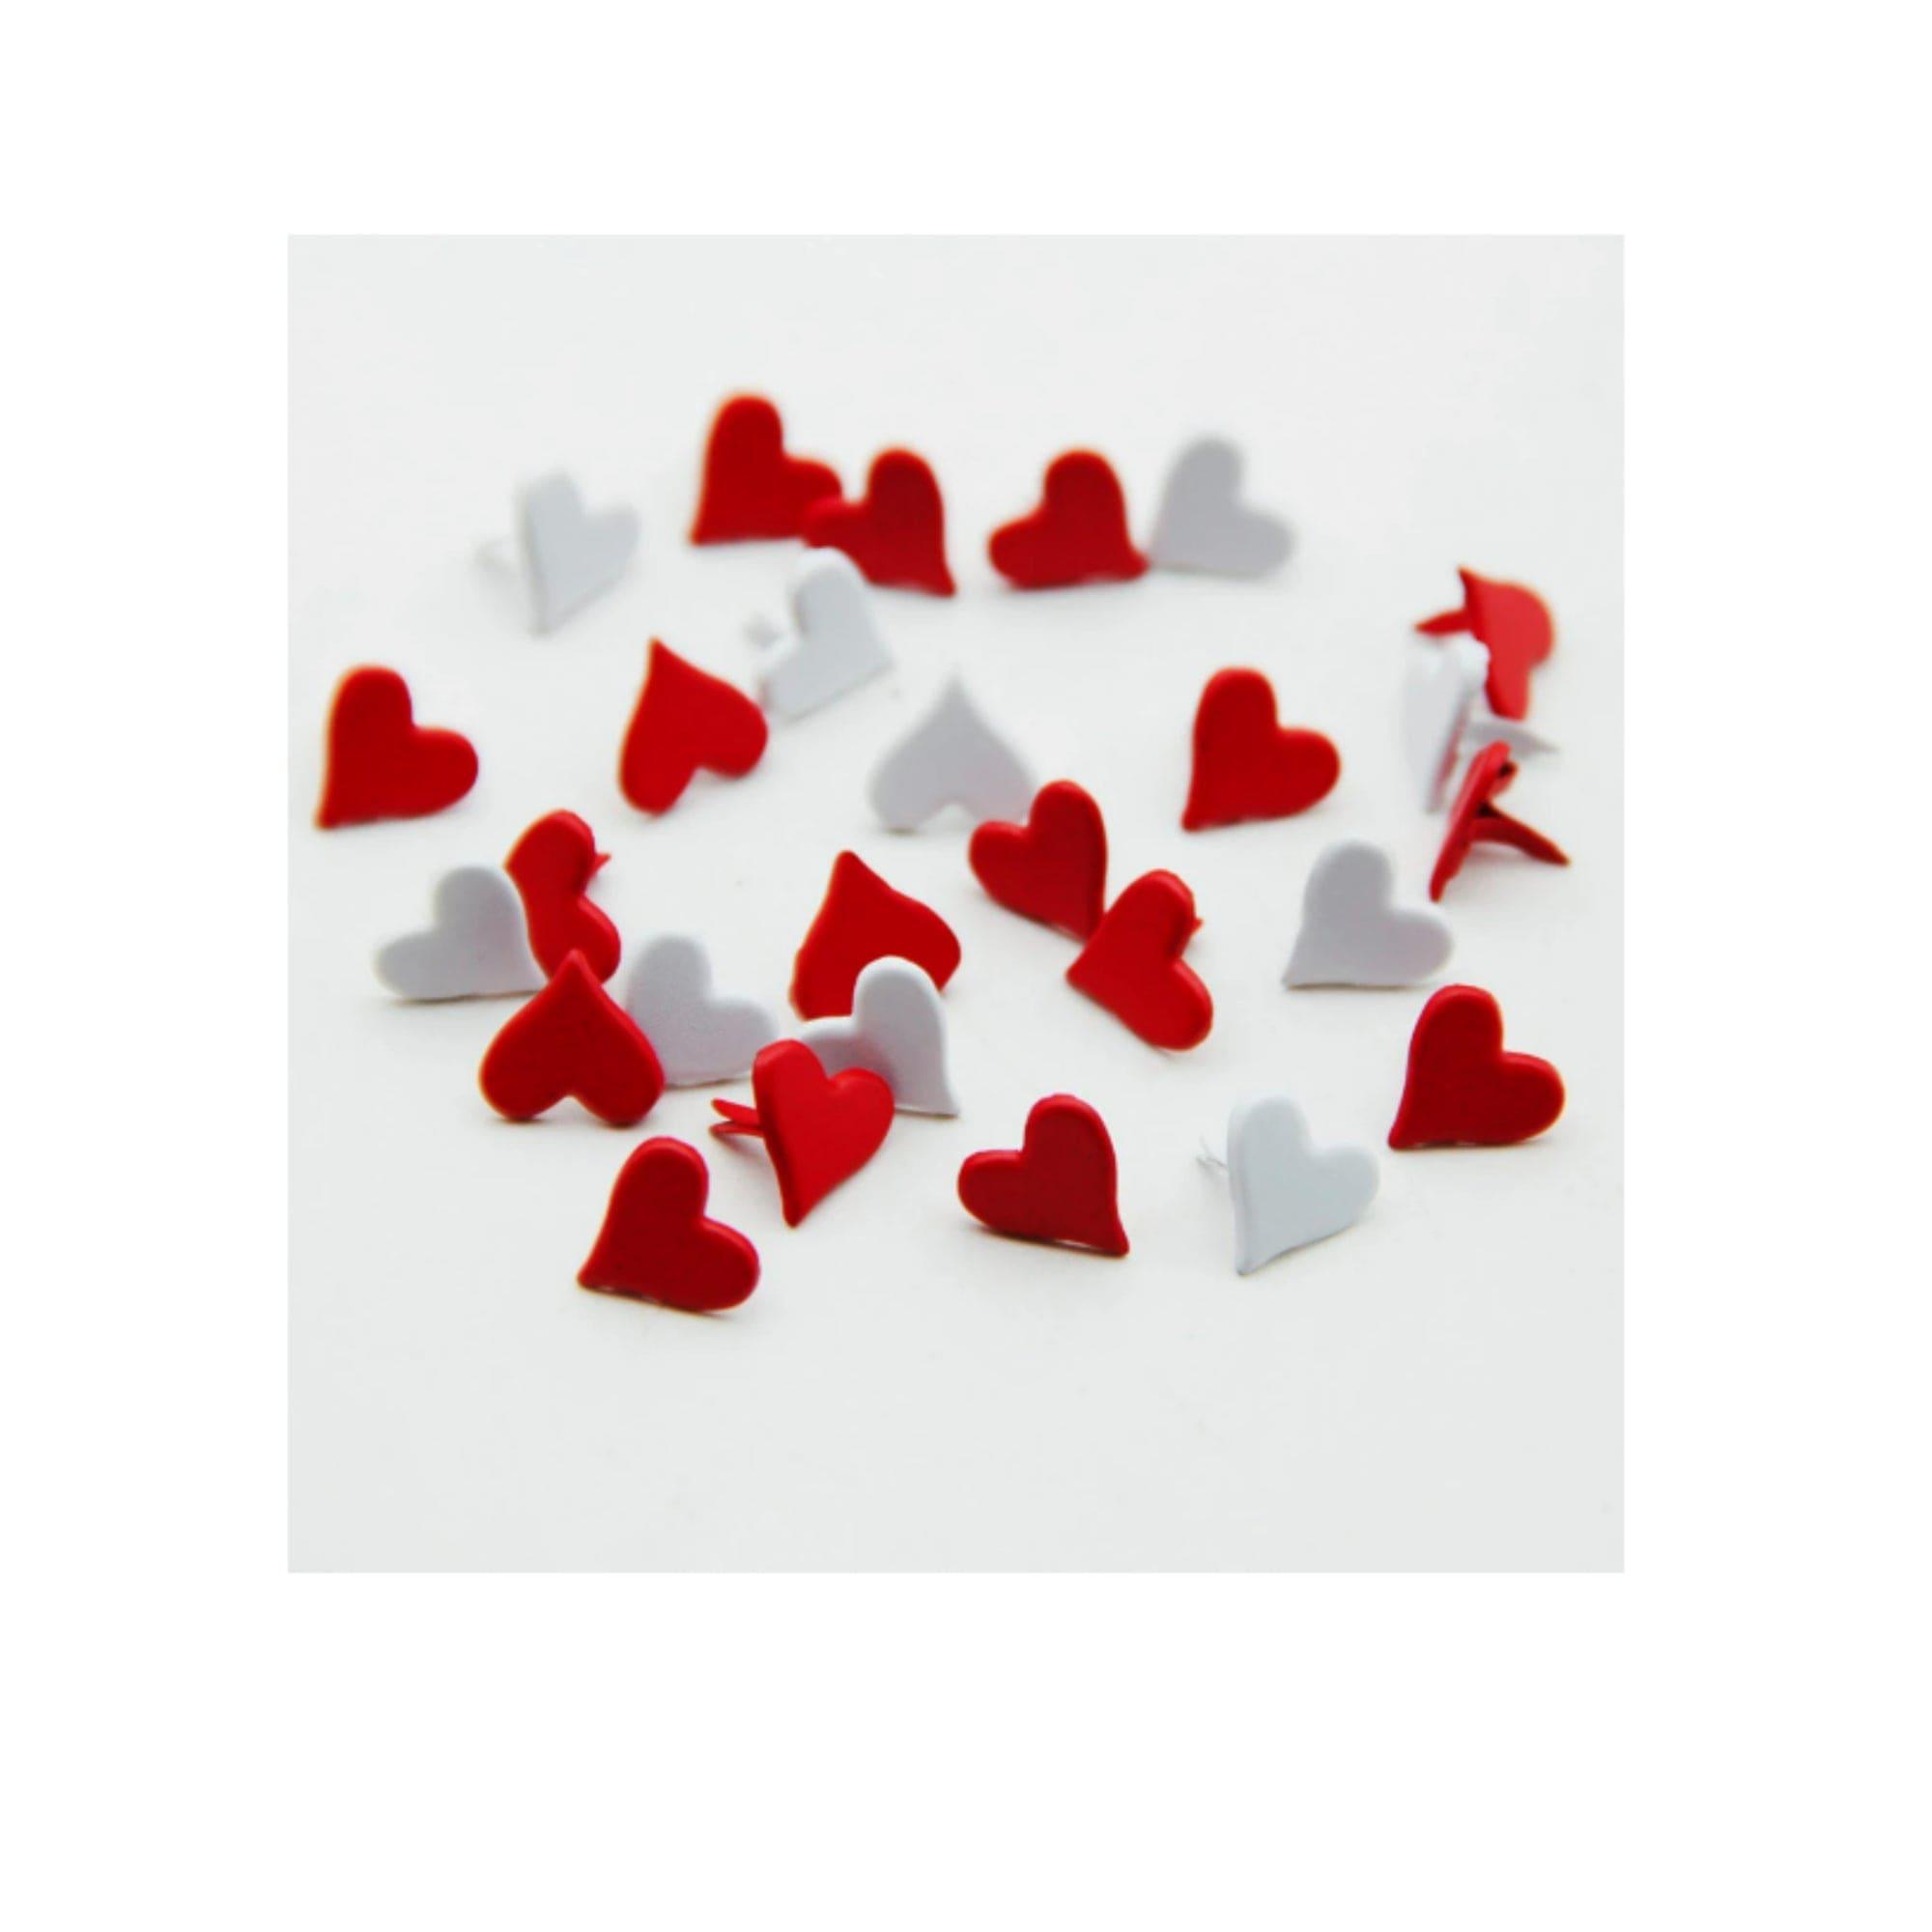 Red & White Heart Brads by SSC Designs - Pkg. of 12 - Scrapbook Supply Companies